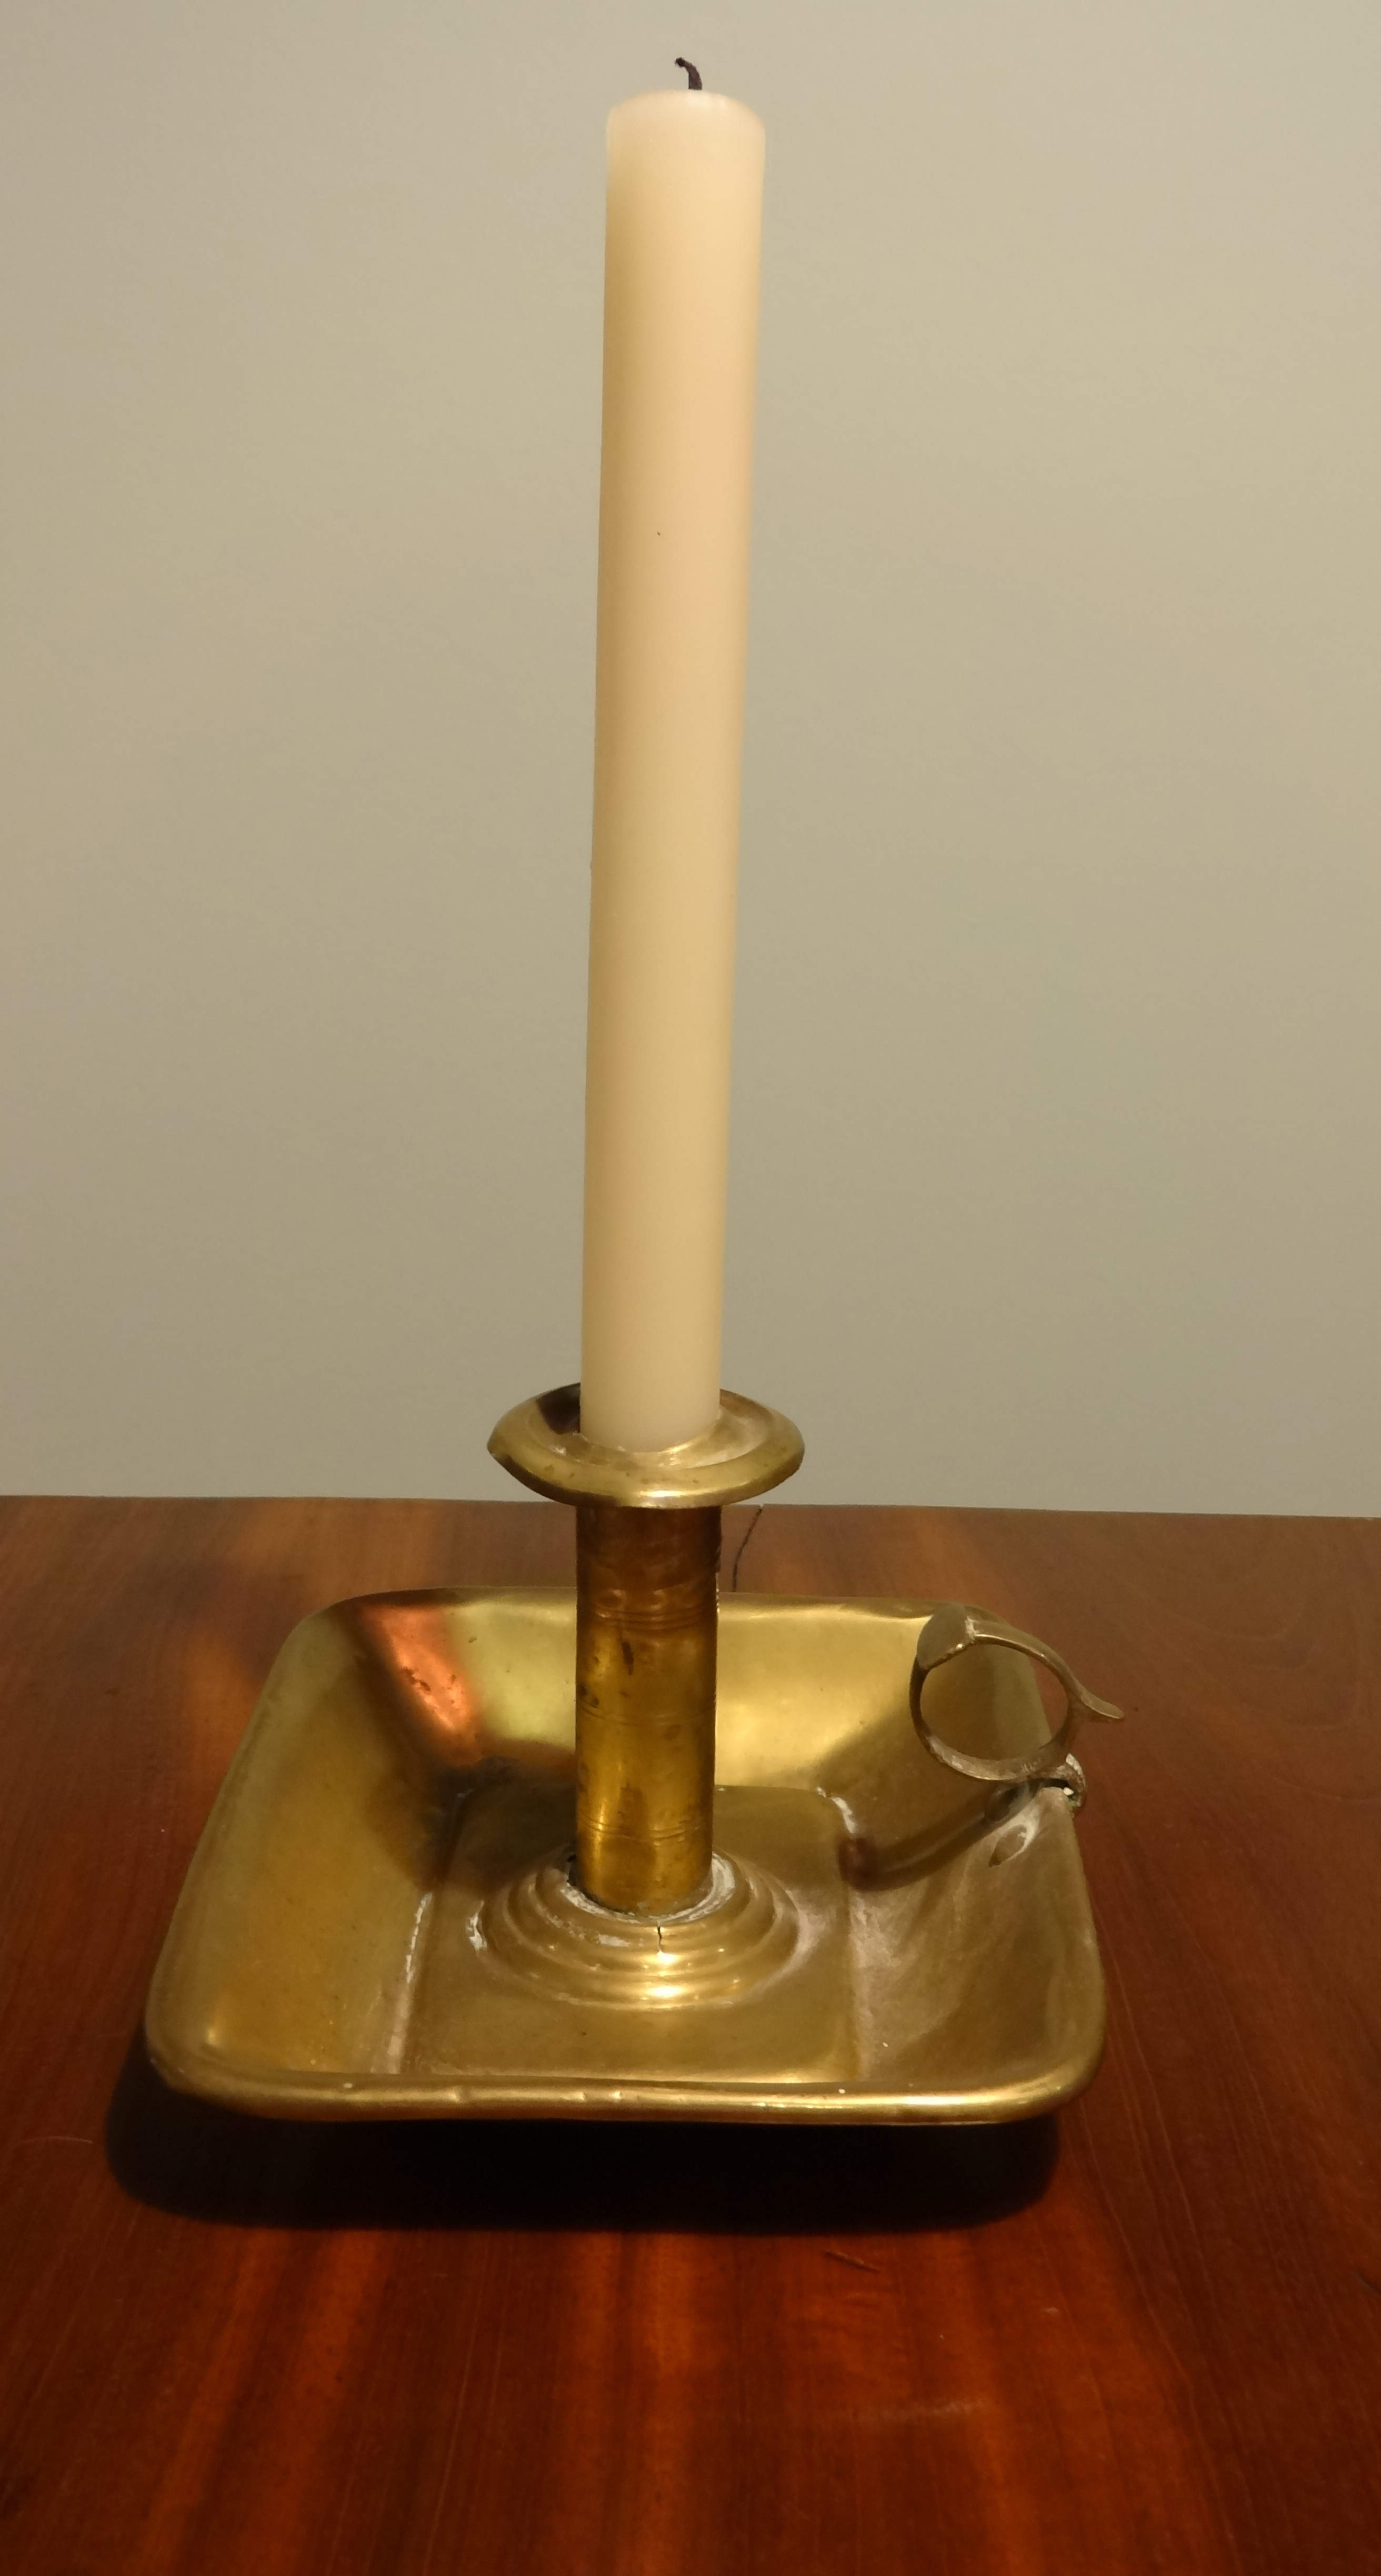 Candlestick belonging to Henry Clay Everett